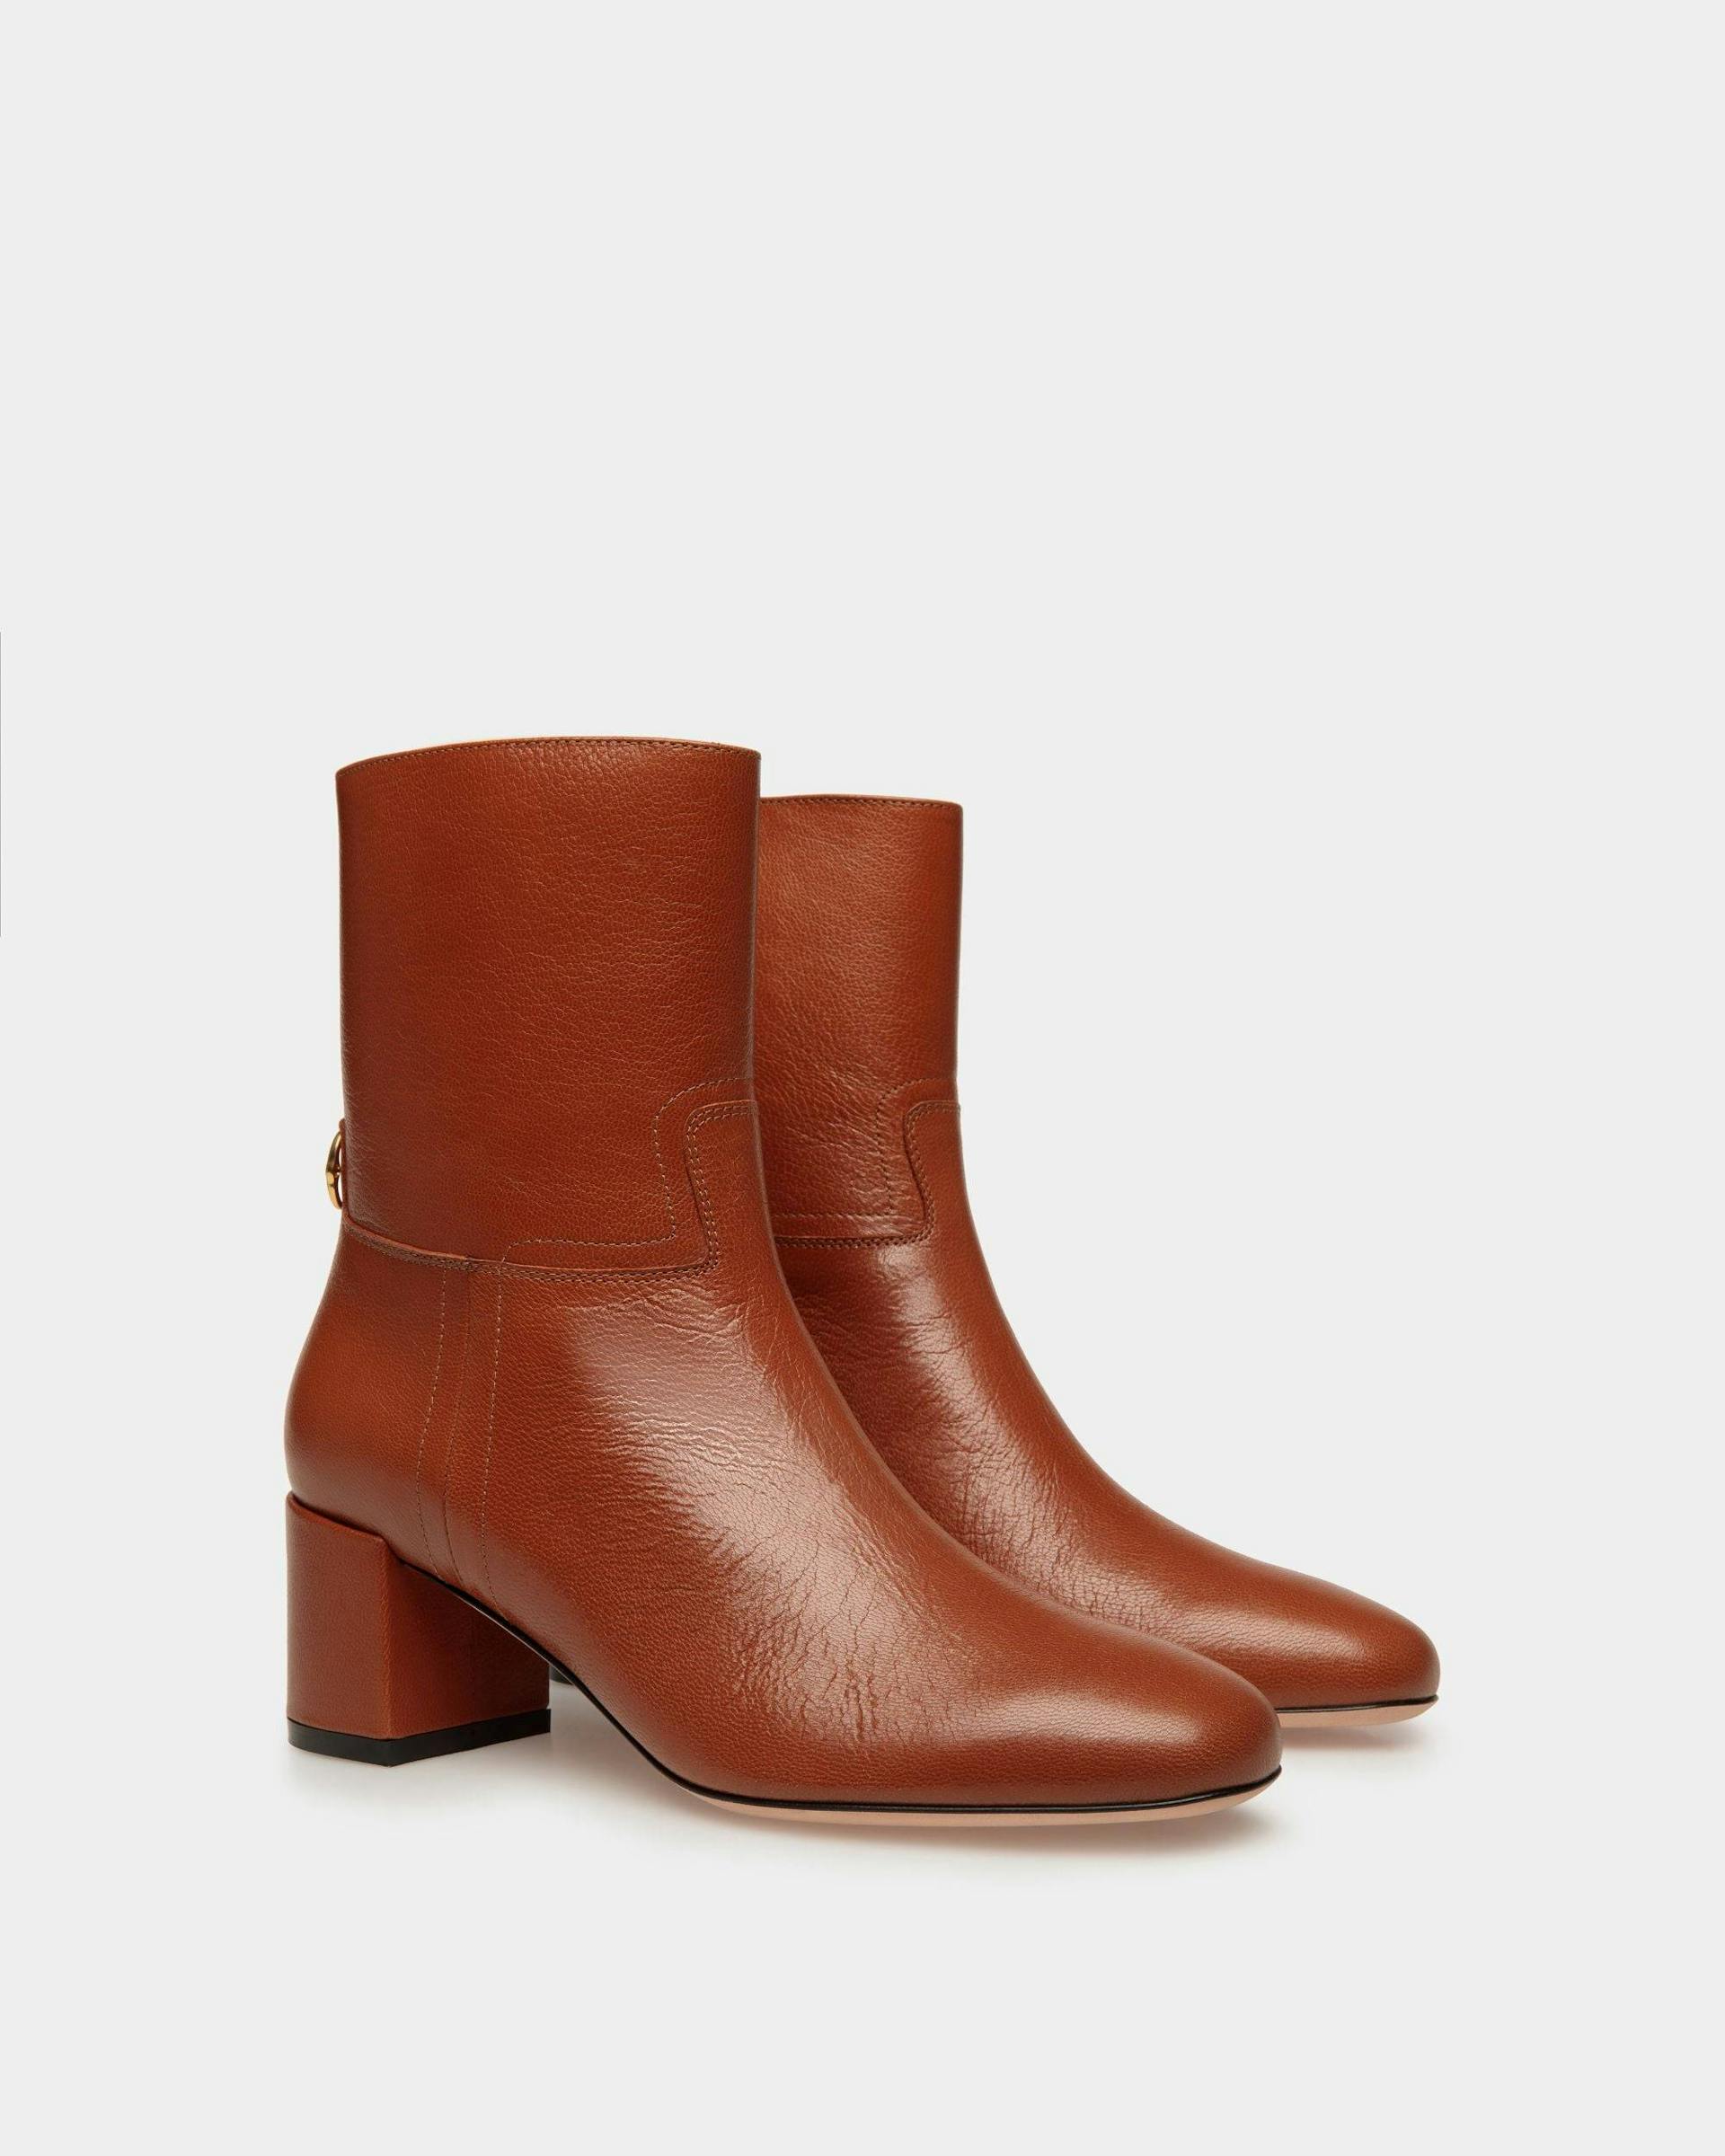 Daily Emblem Booties In Brown Leather - Women's - Bally - 02